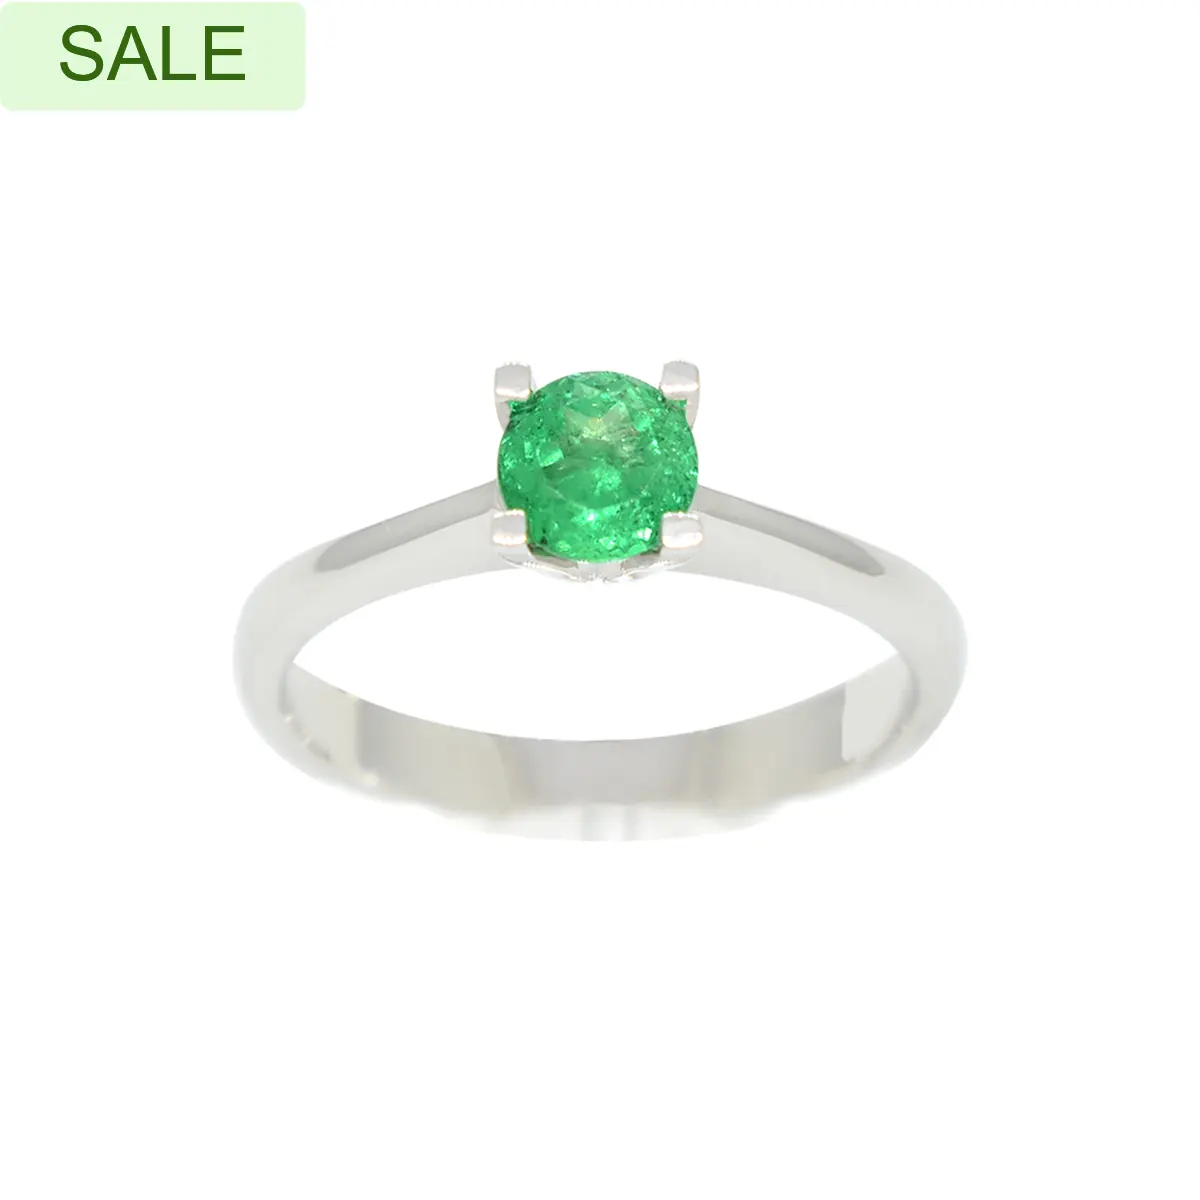 Solitaire Emerald Ring in 18K White Gold With Round Cut Natural Emerald